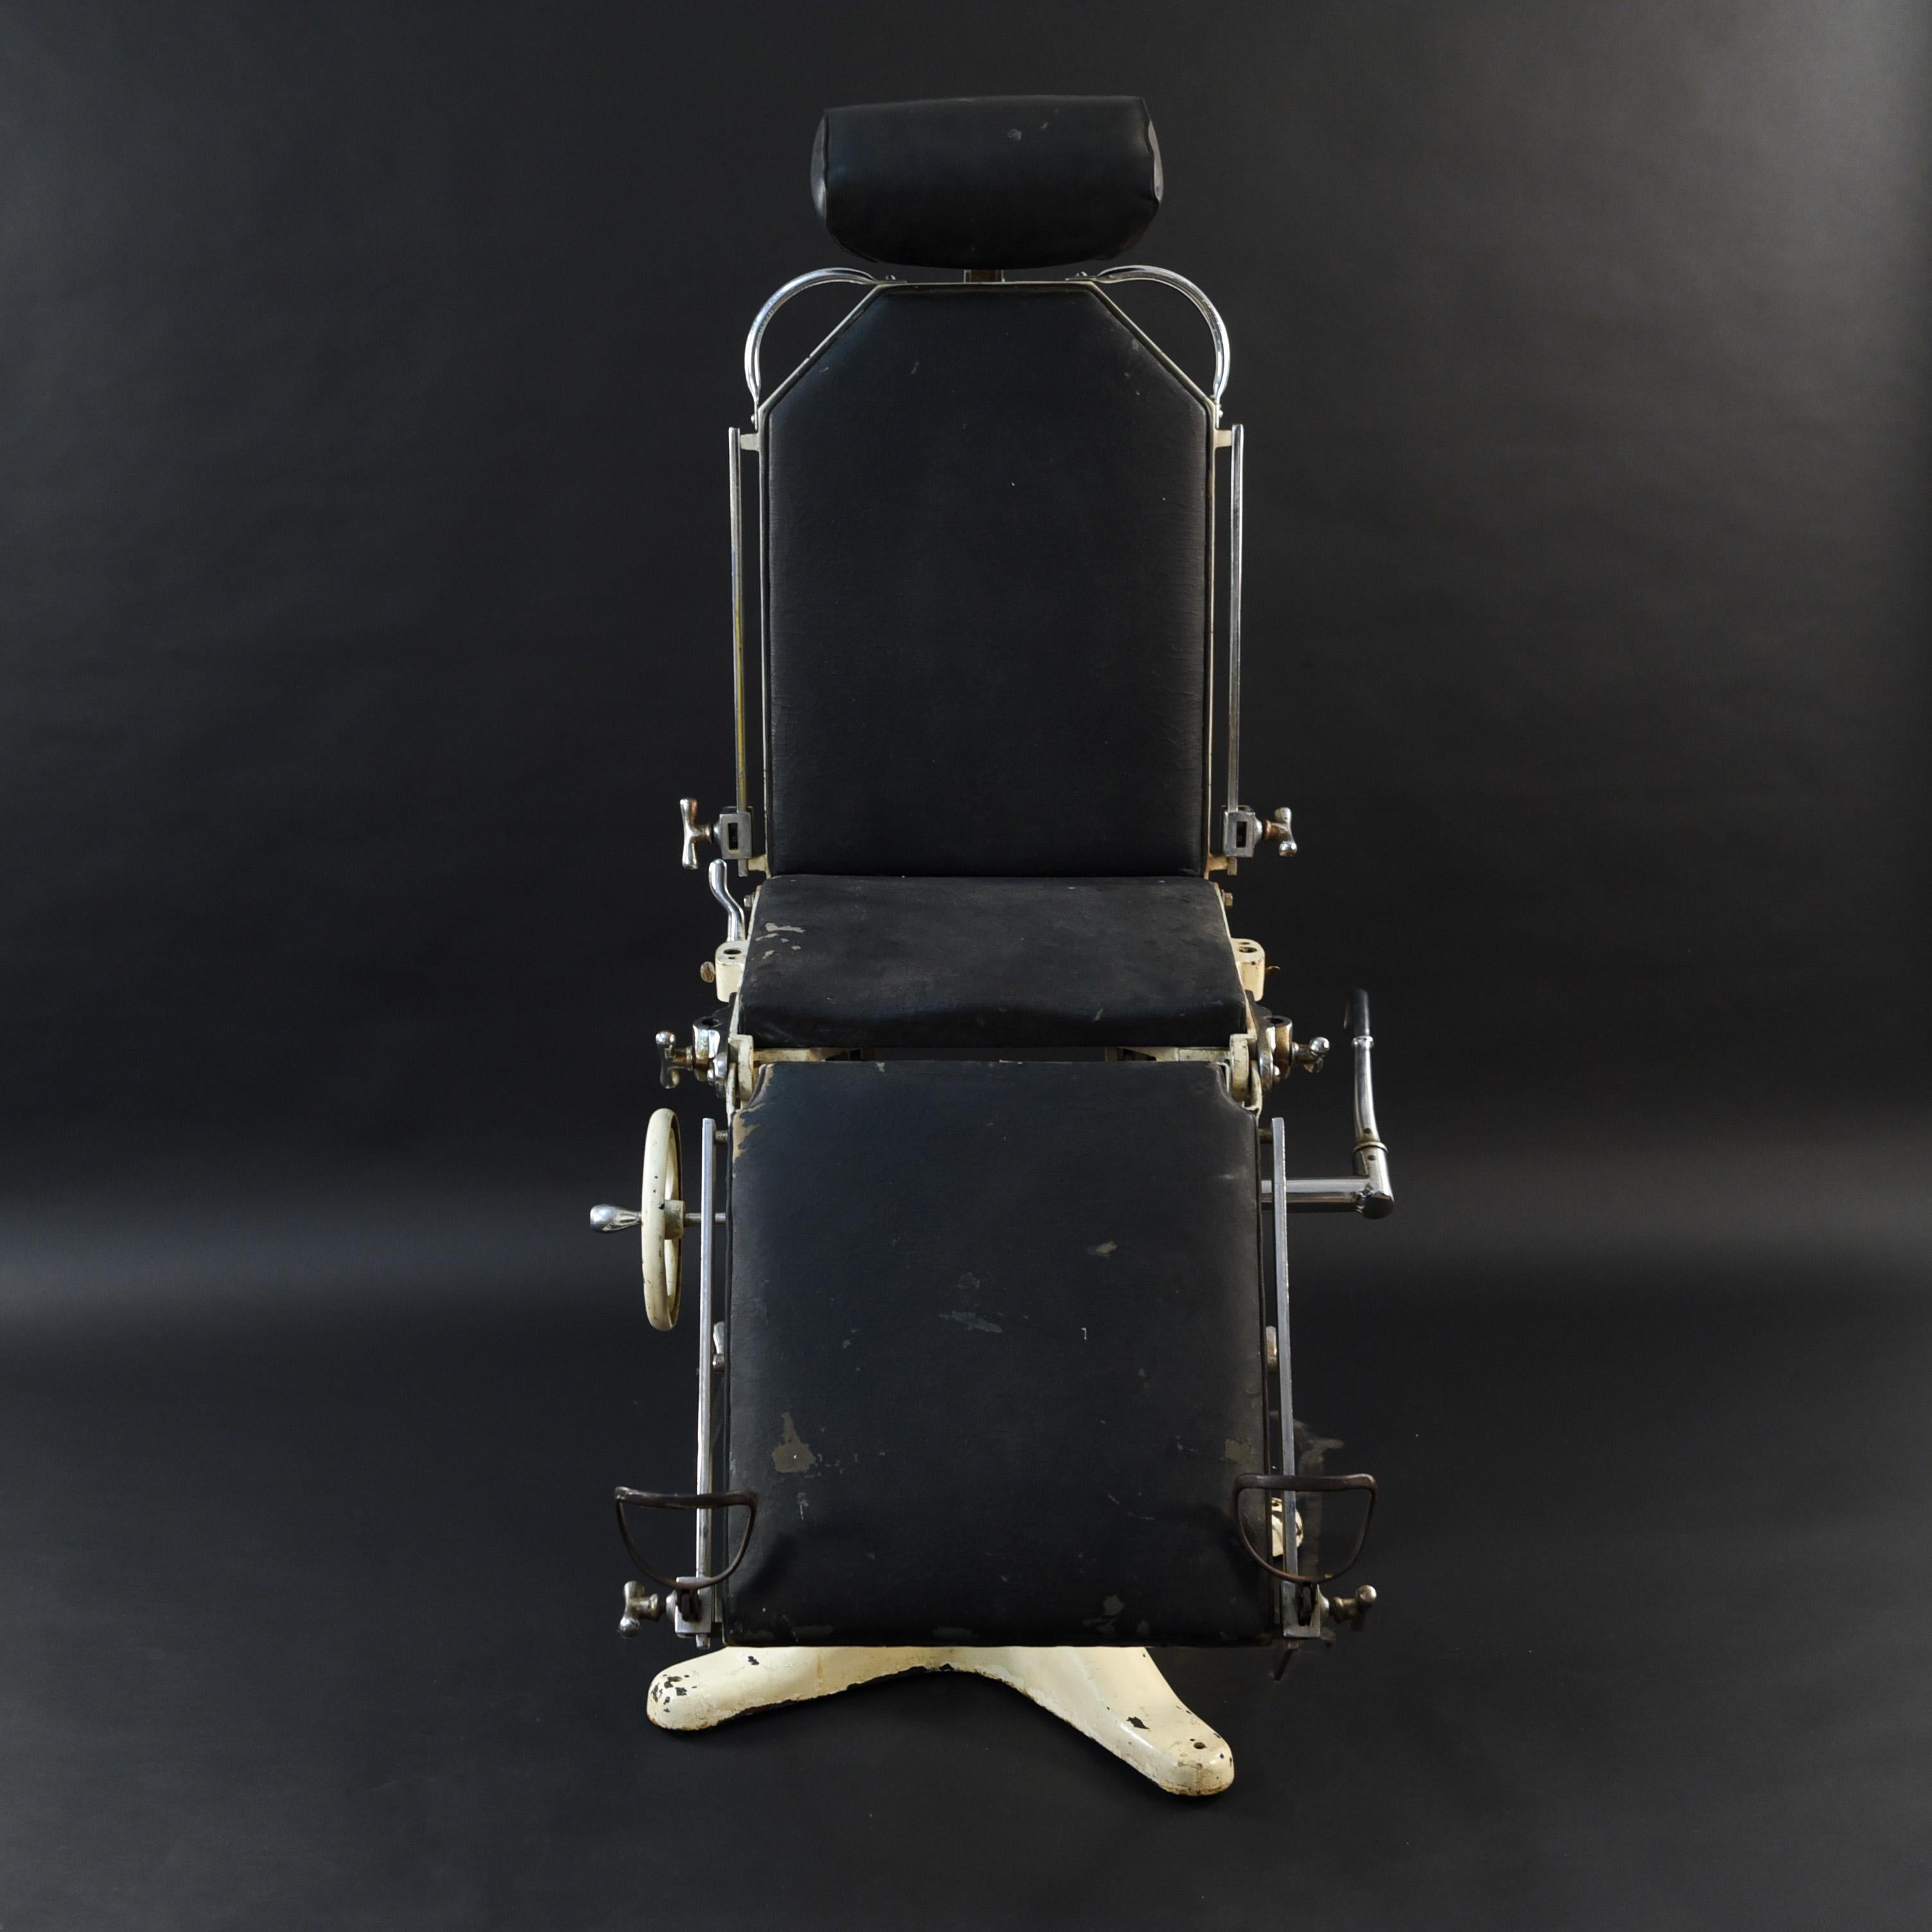 This very interesting medical chair is sure to be a conversation starter! A wonderful piece of medical history.